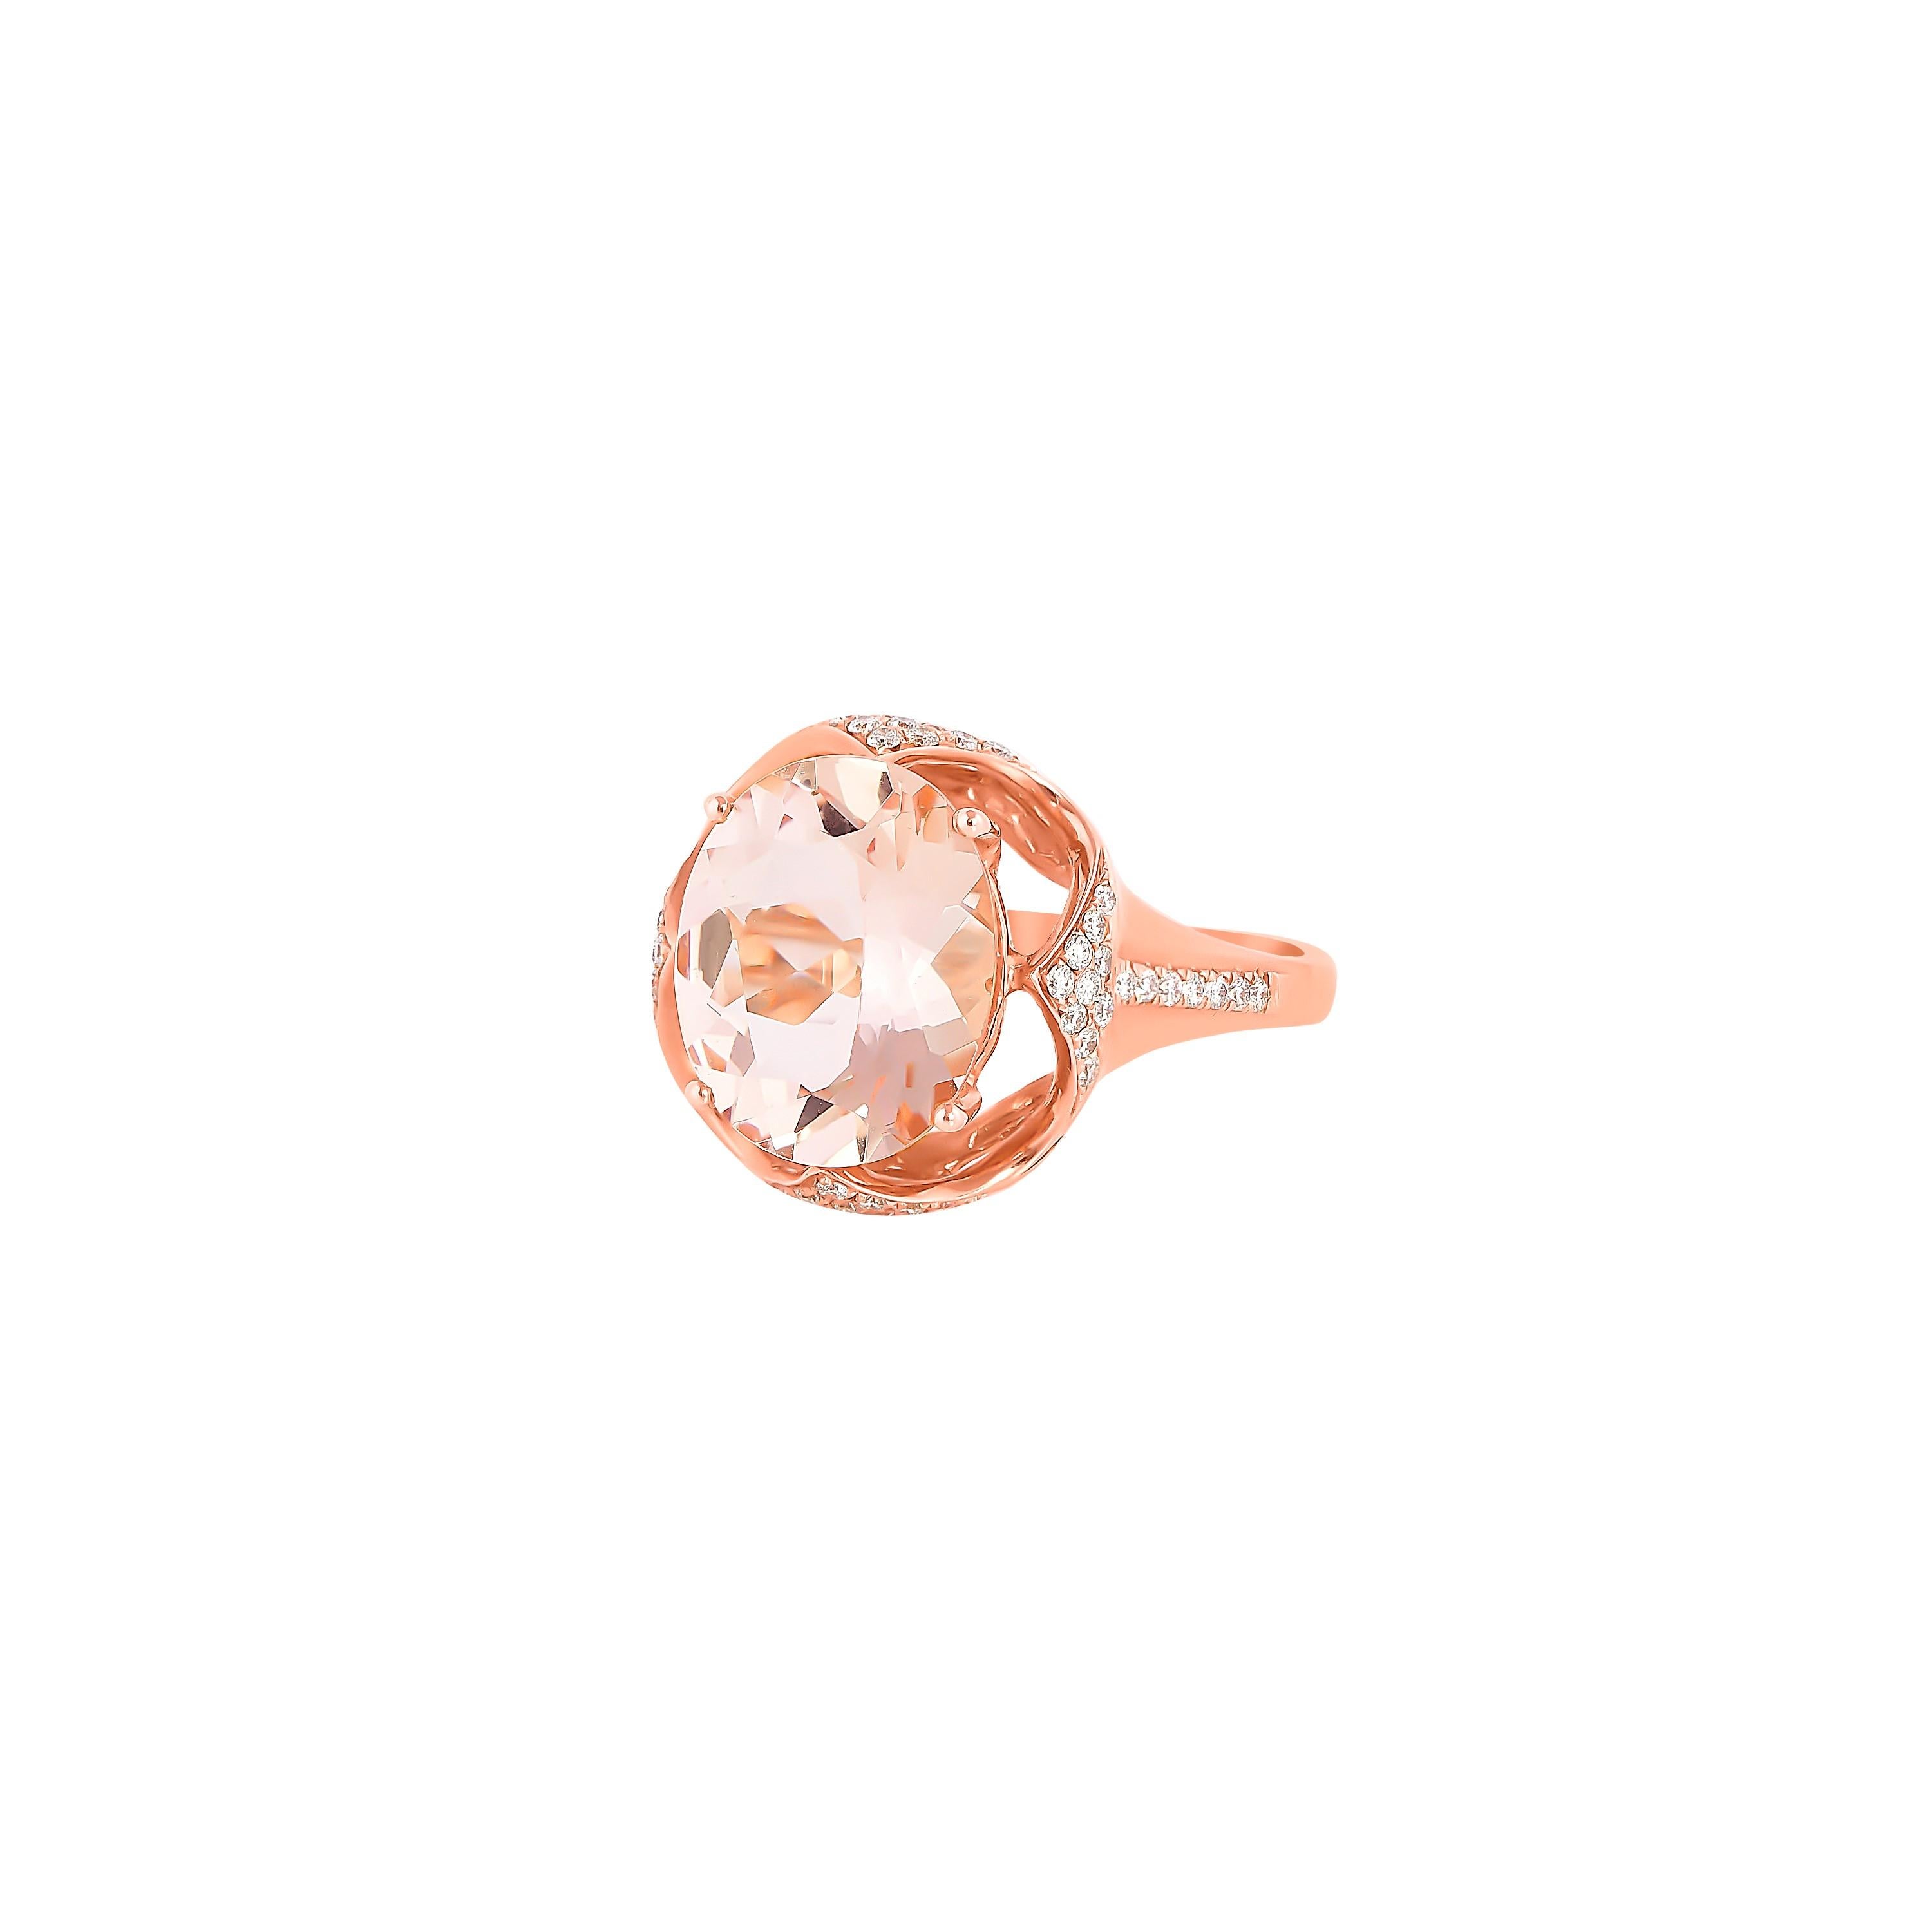 Oval Cut 3.61 Carat Morganite and Diamond Ring in 18 Karat Rose Gold For Sale